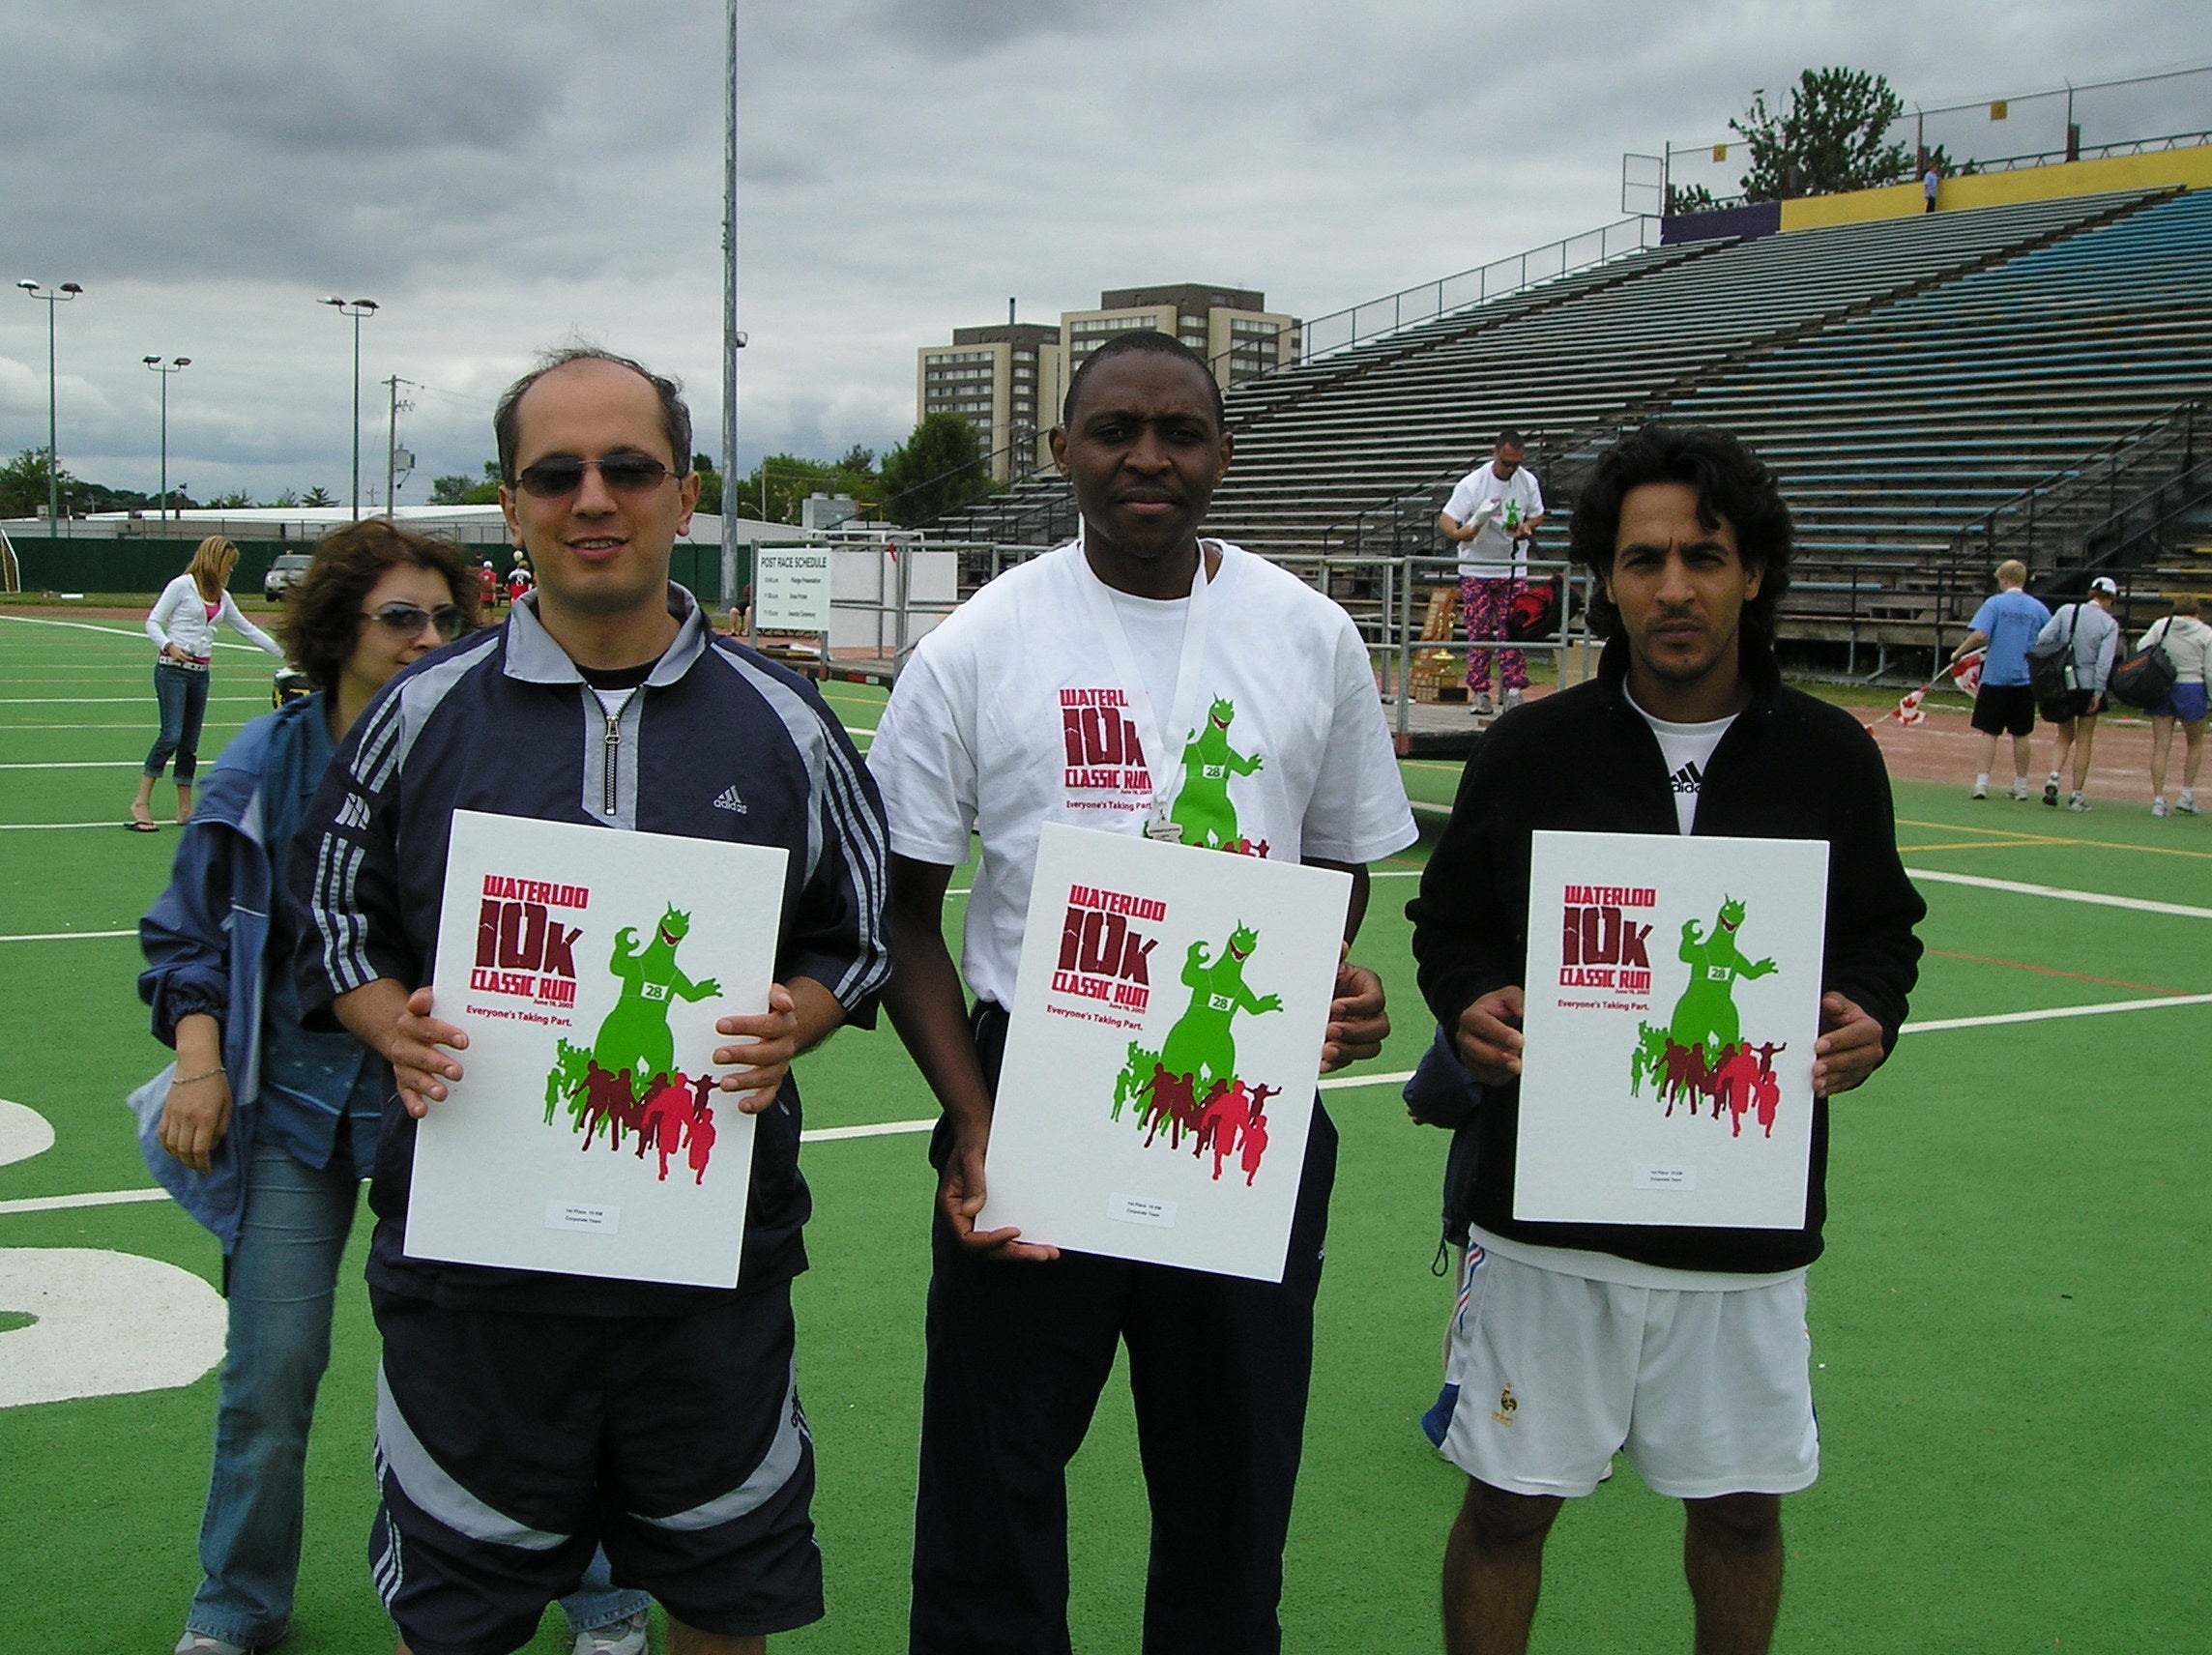 June 2005: 1st place in the corporate team competition of the Waterloo Classic 10 K race. From left to right: Shahab, Jean Paul, Jalil.